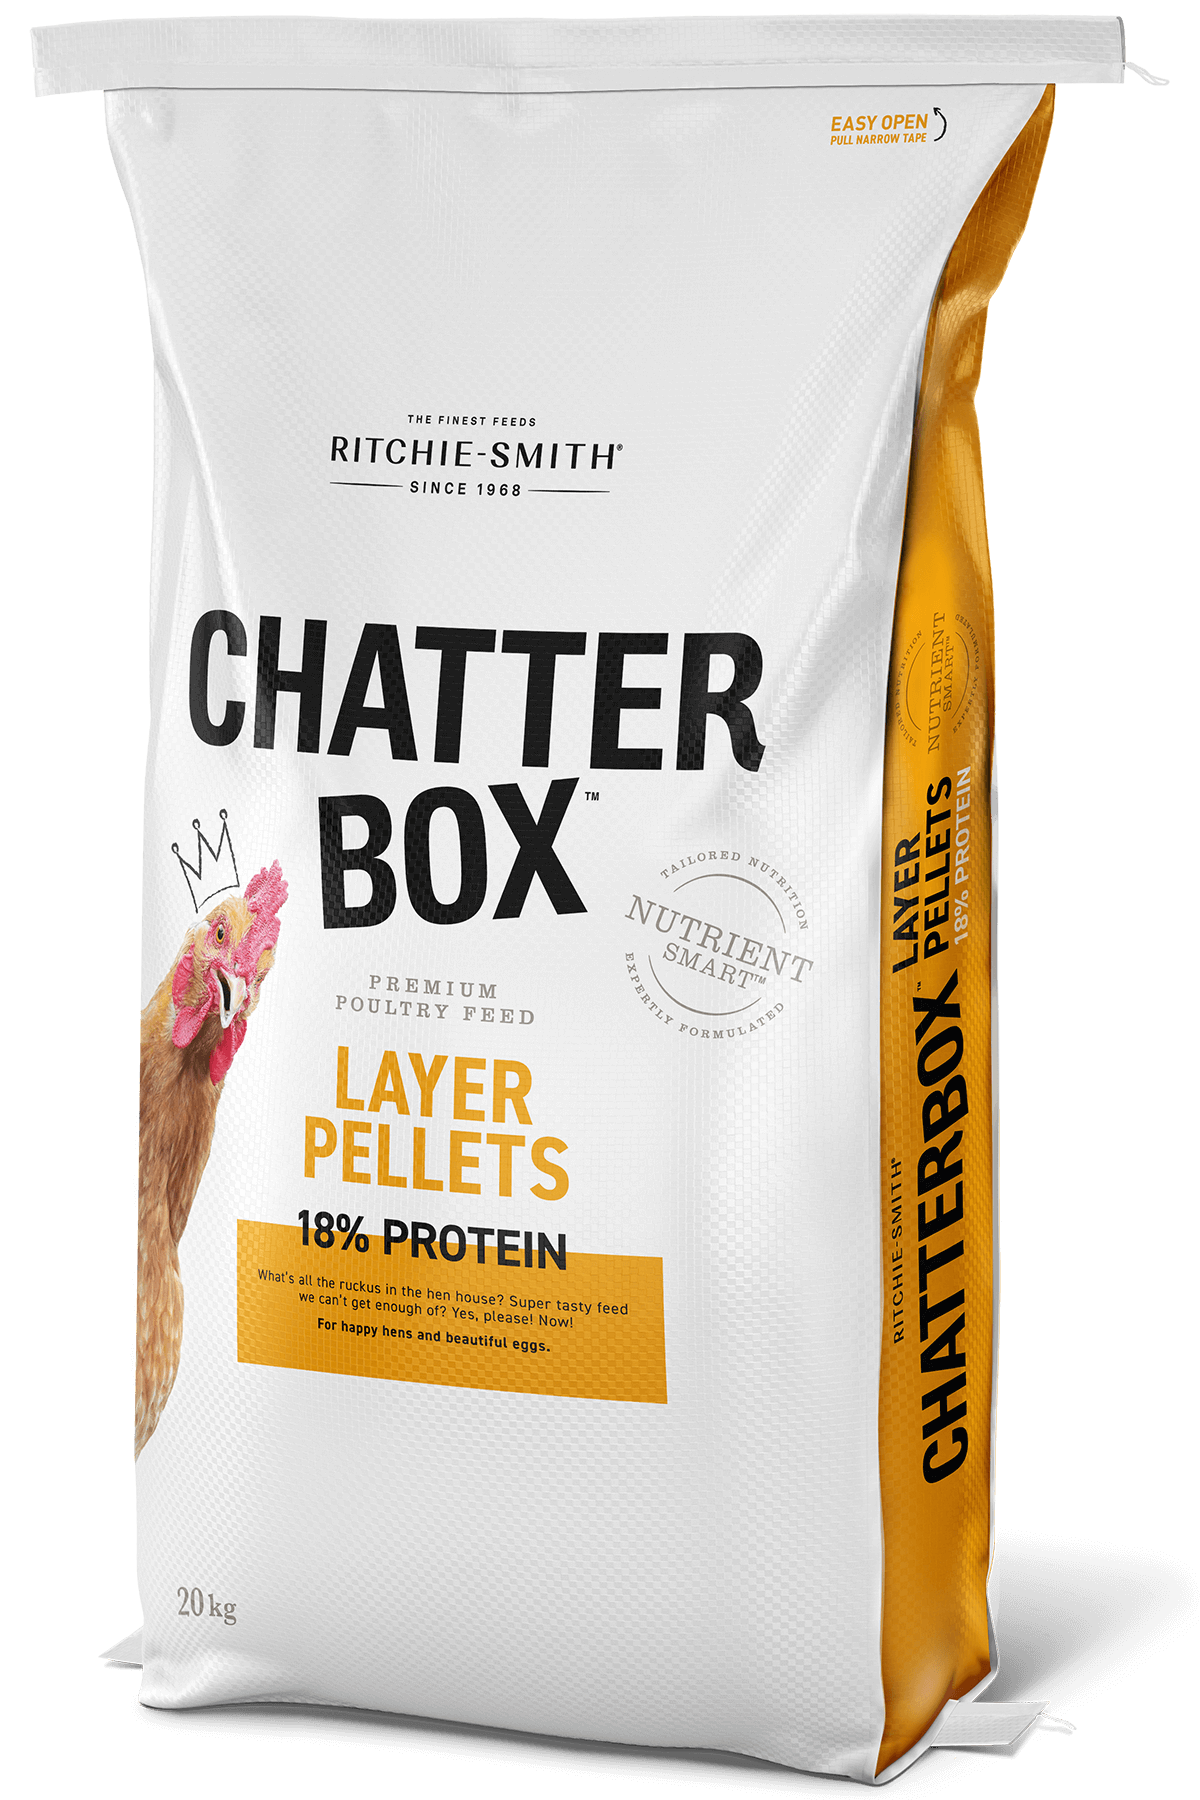 Layer Pellets by Chatter Box Premium Poultry Feed